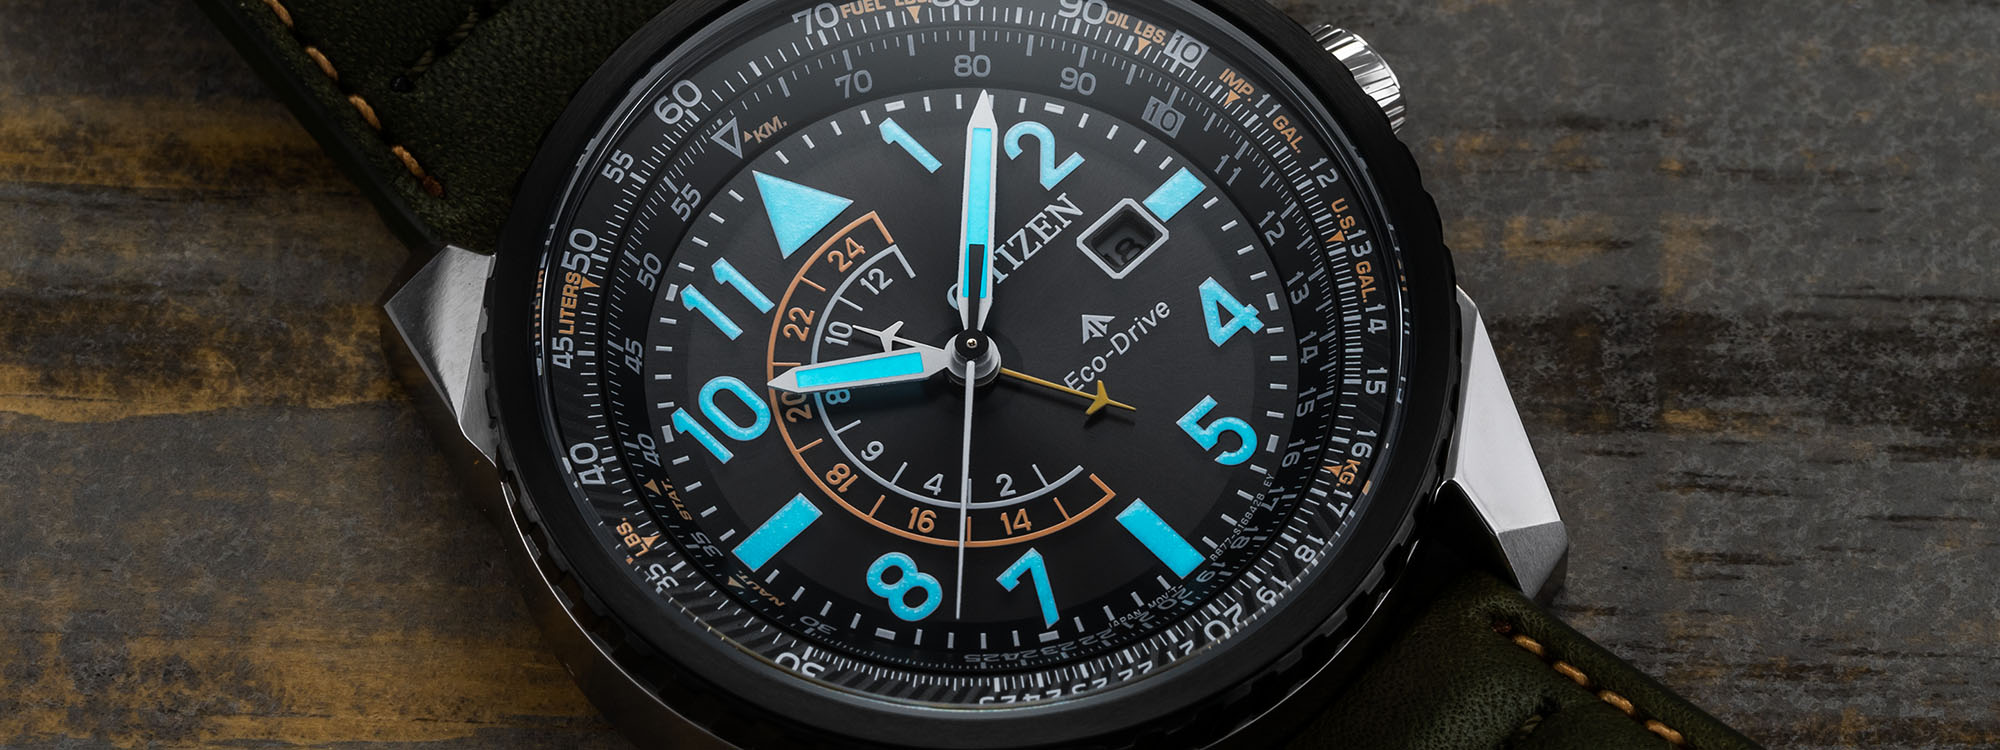 Citizen Watch Review: Brand History and Highlights from the Modern Col